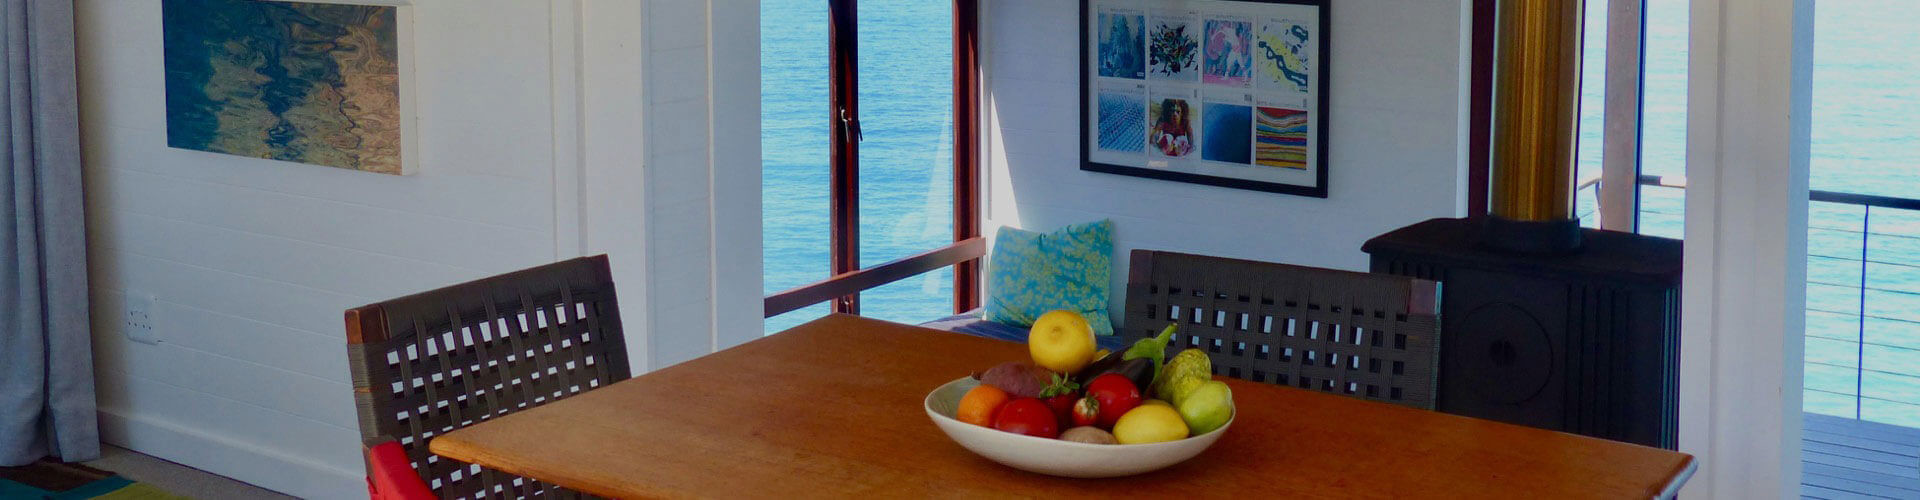 A bowl of yellow and red fruit rests on a brown table in the lounge of our Bees Knees rental villa, in the Wilderness, South Africa, where you can enjoy a magnificent ocean view right from your lounge.